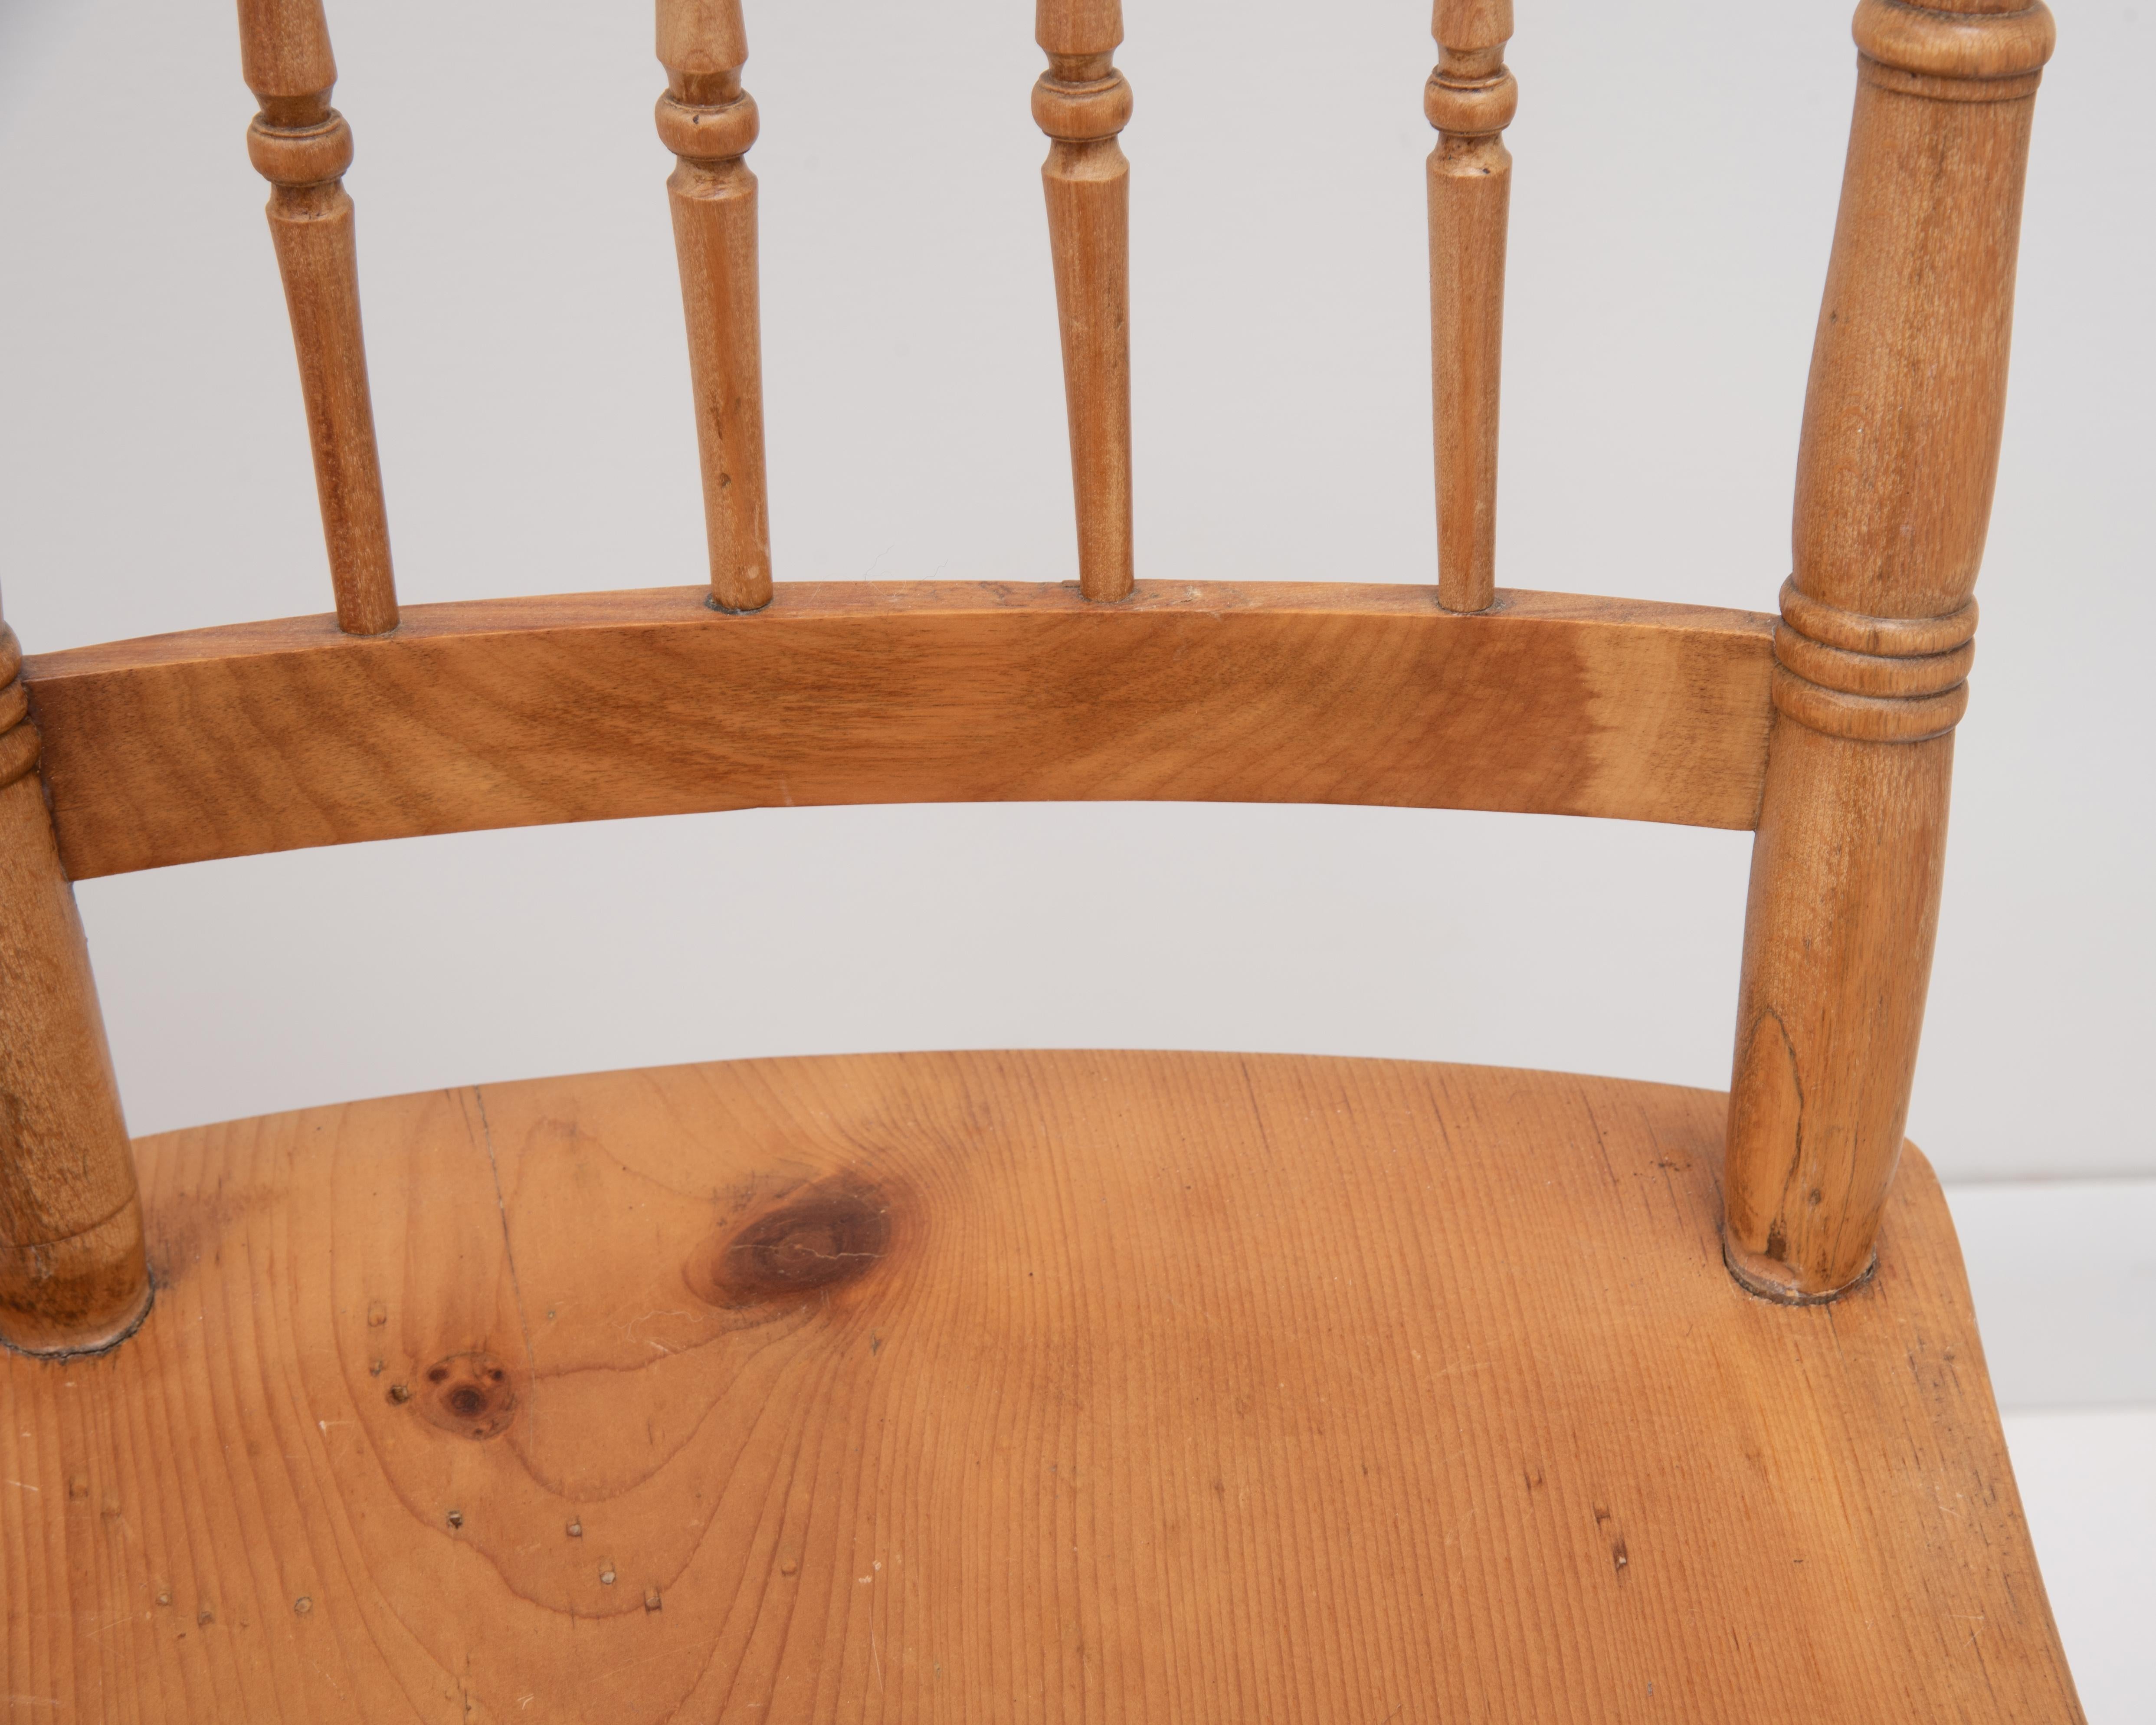 English Scrubbed Pine Plank Seat Dining Chairs Farmhouse Cottage, a Set of Four For Sale 6